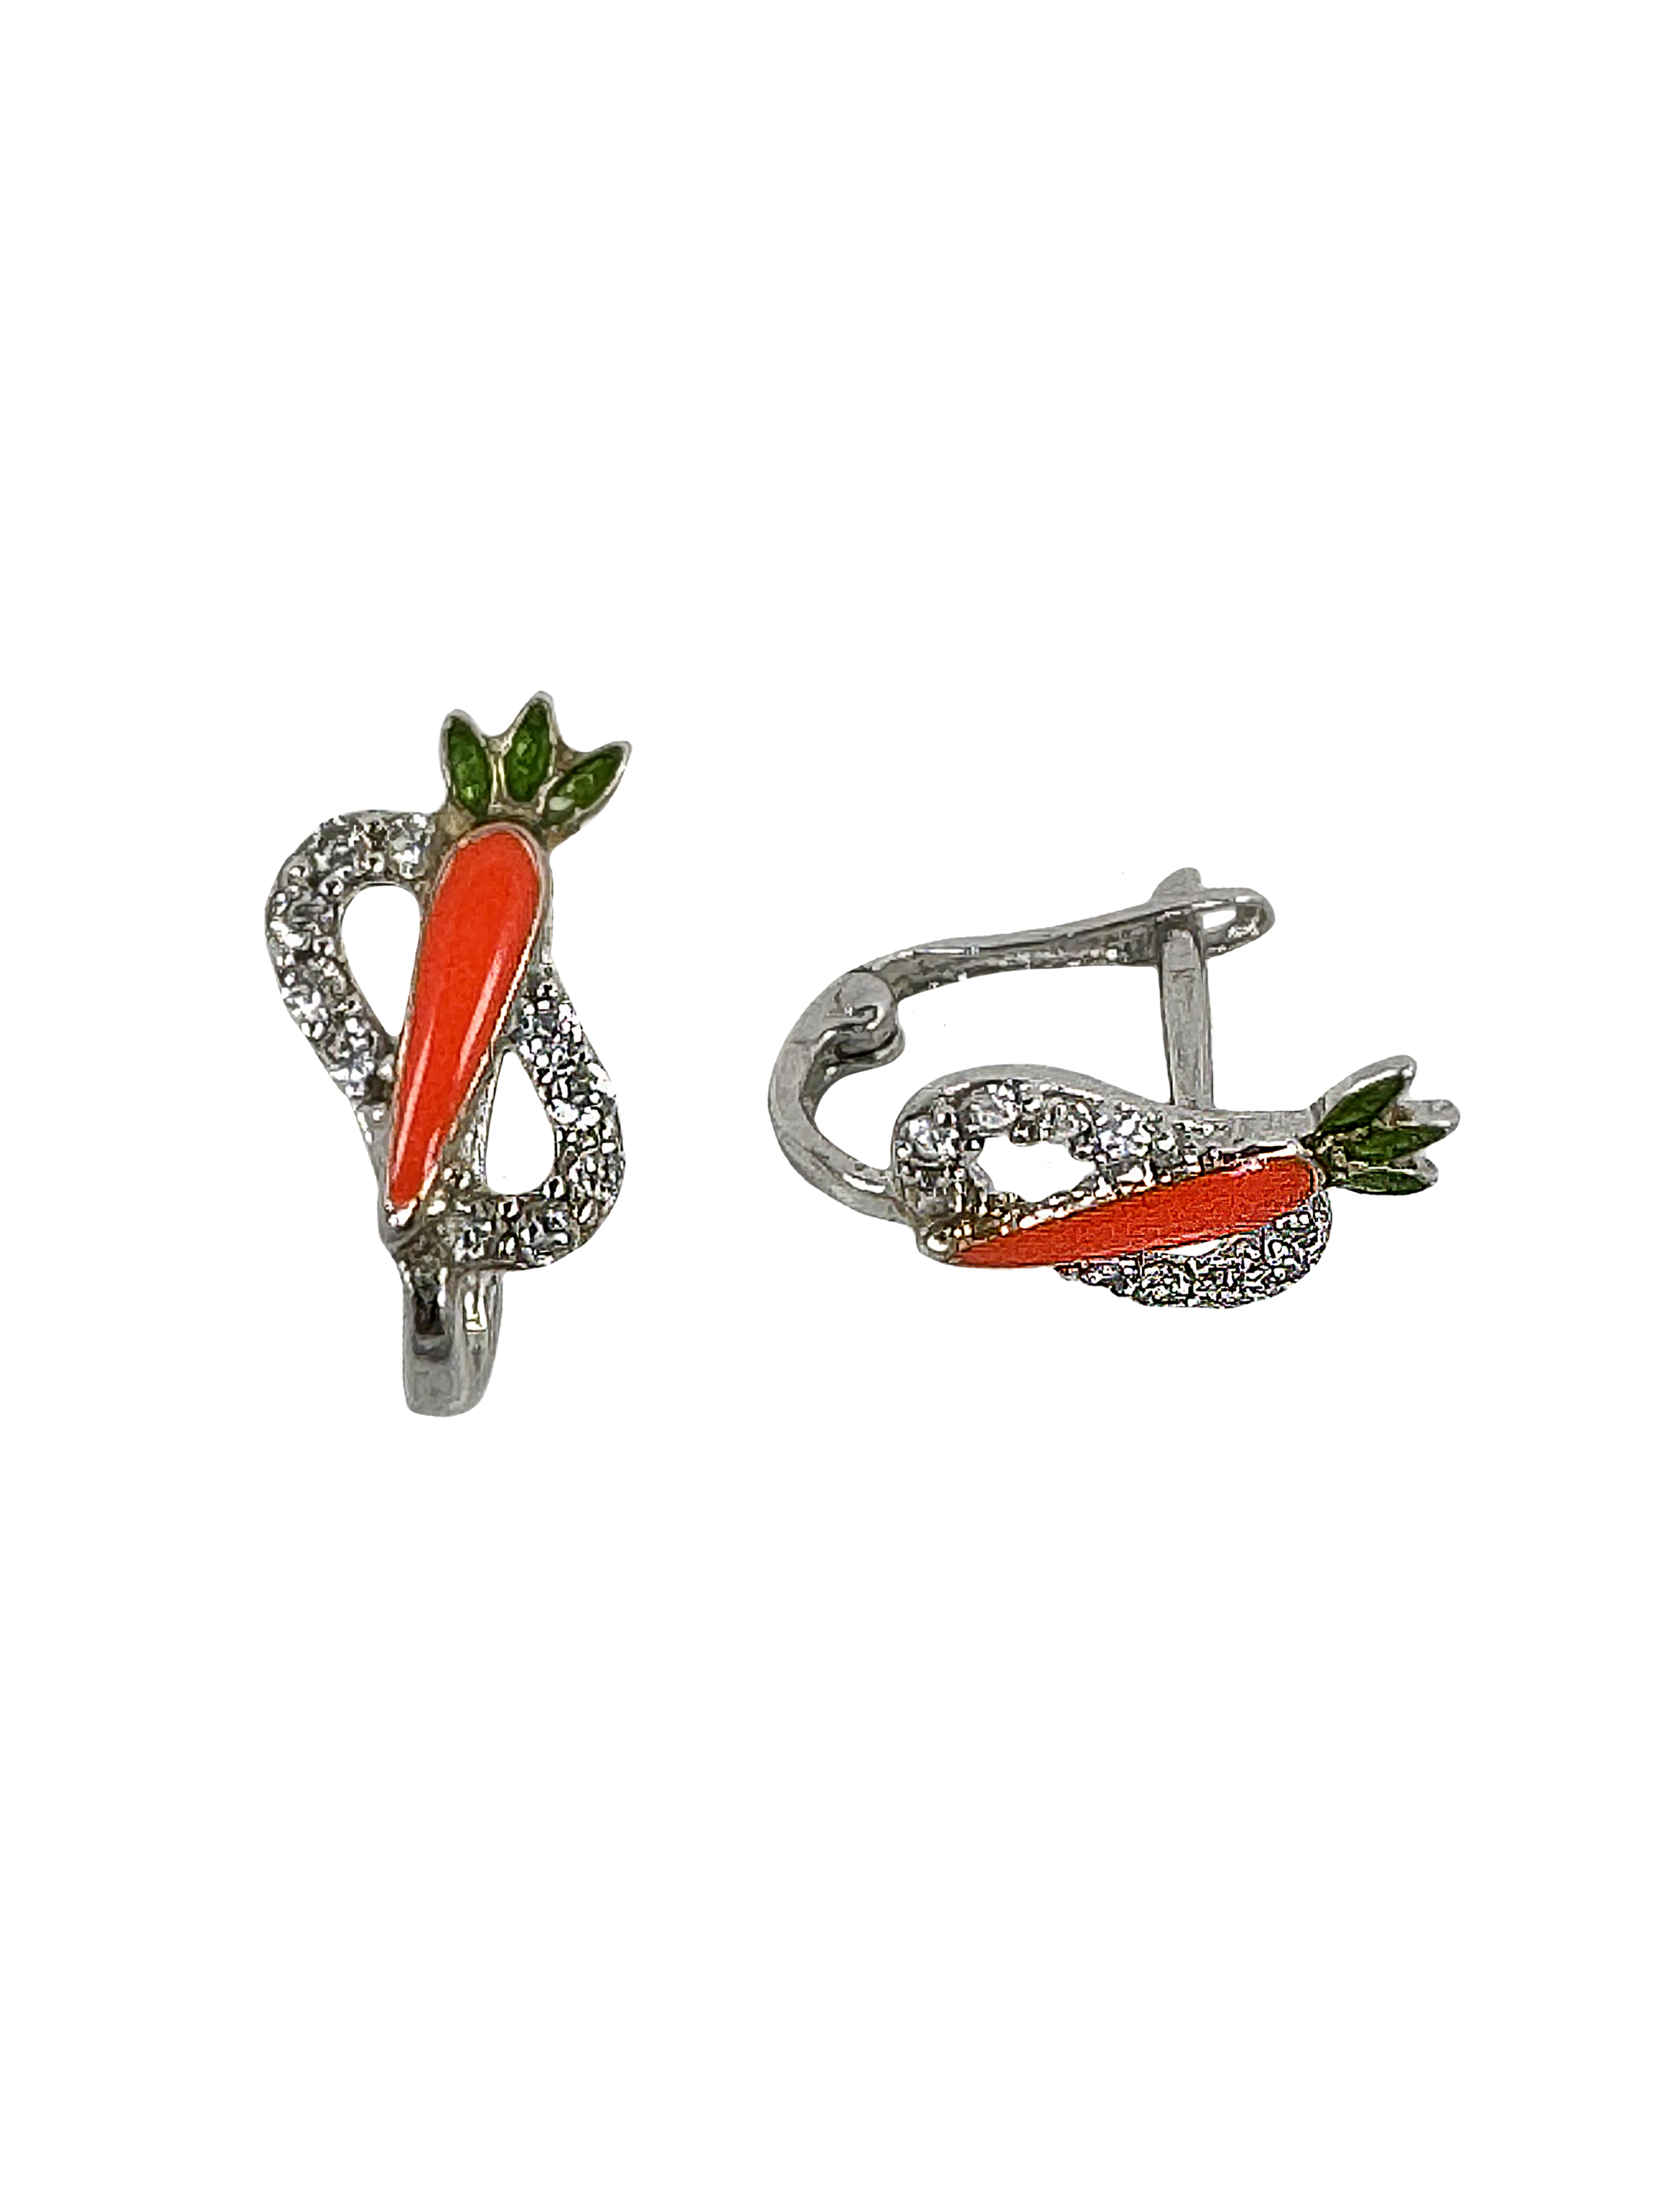 Golden children's earrings made of white gold with carrots